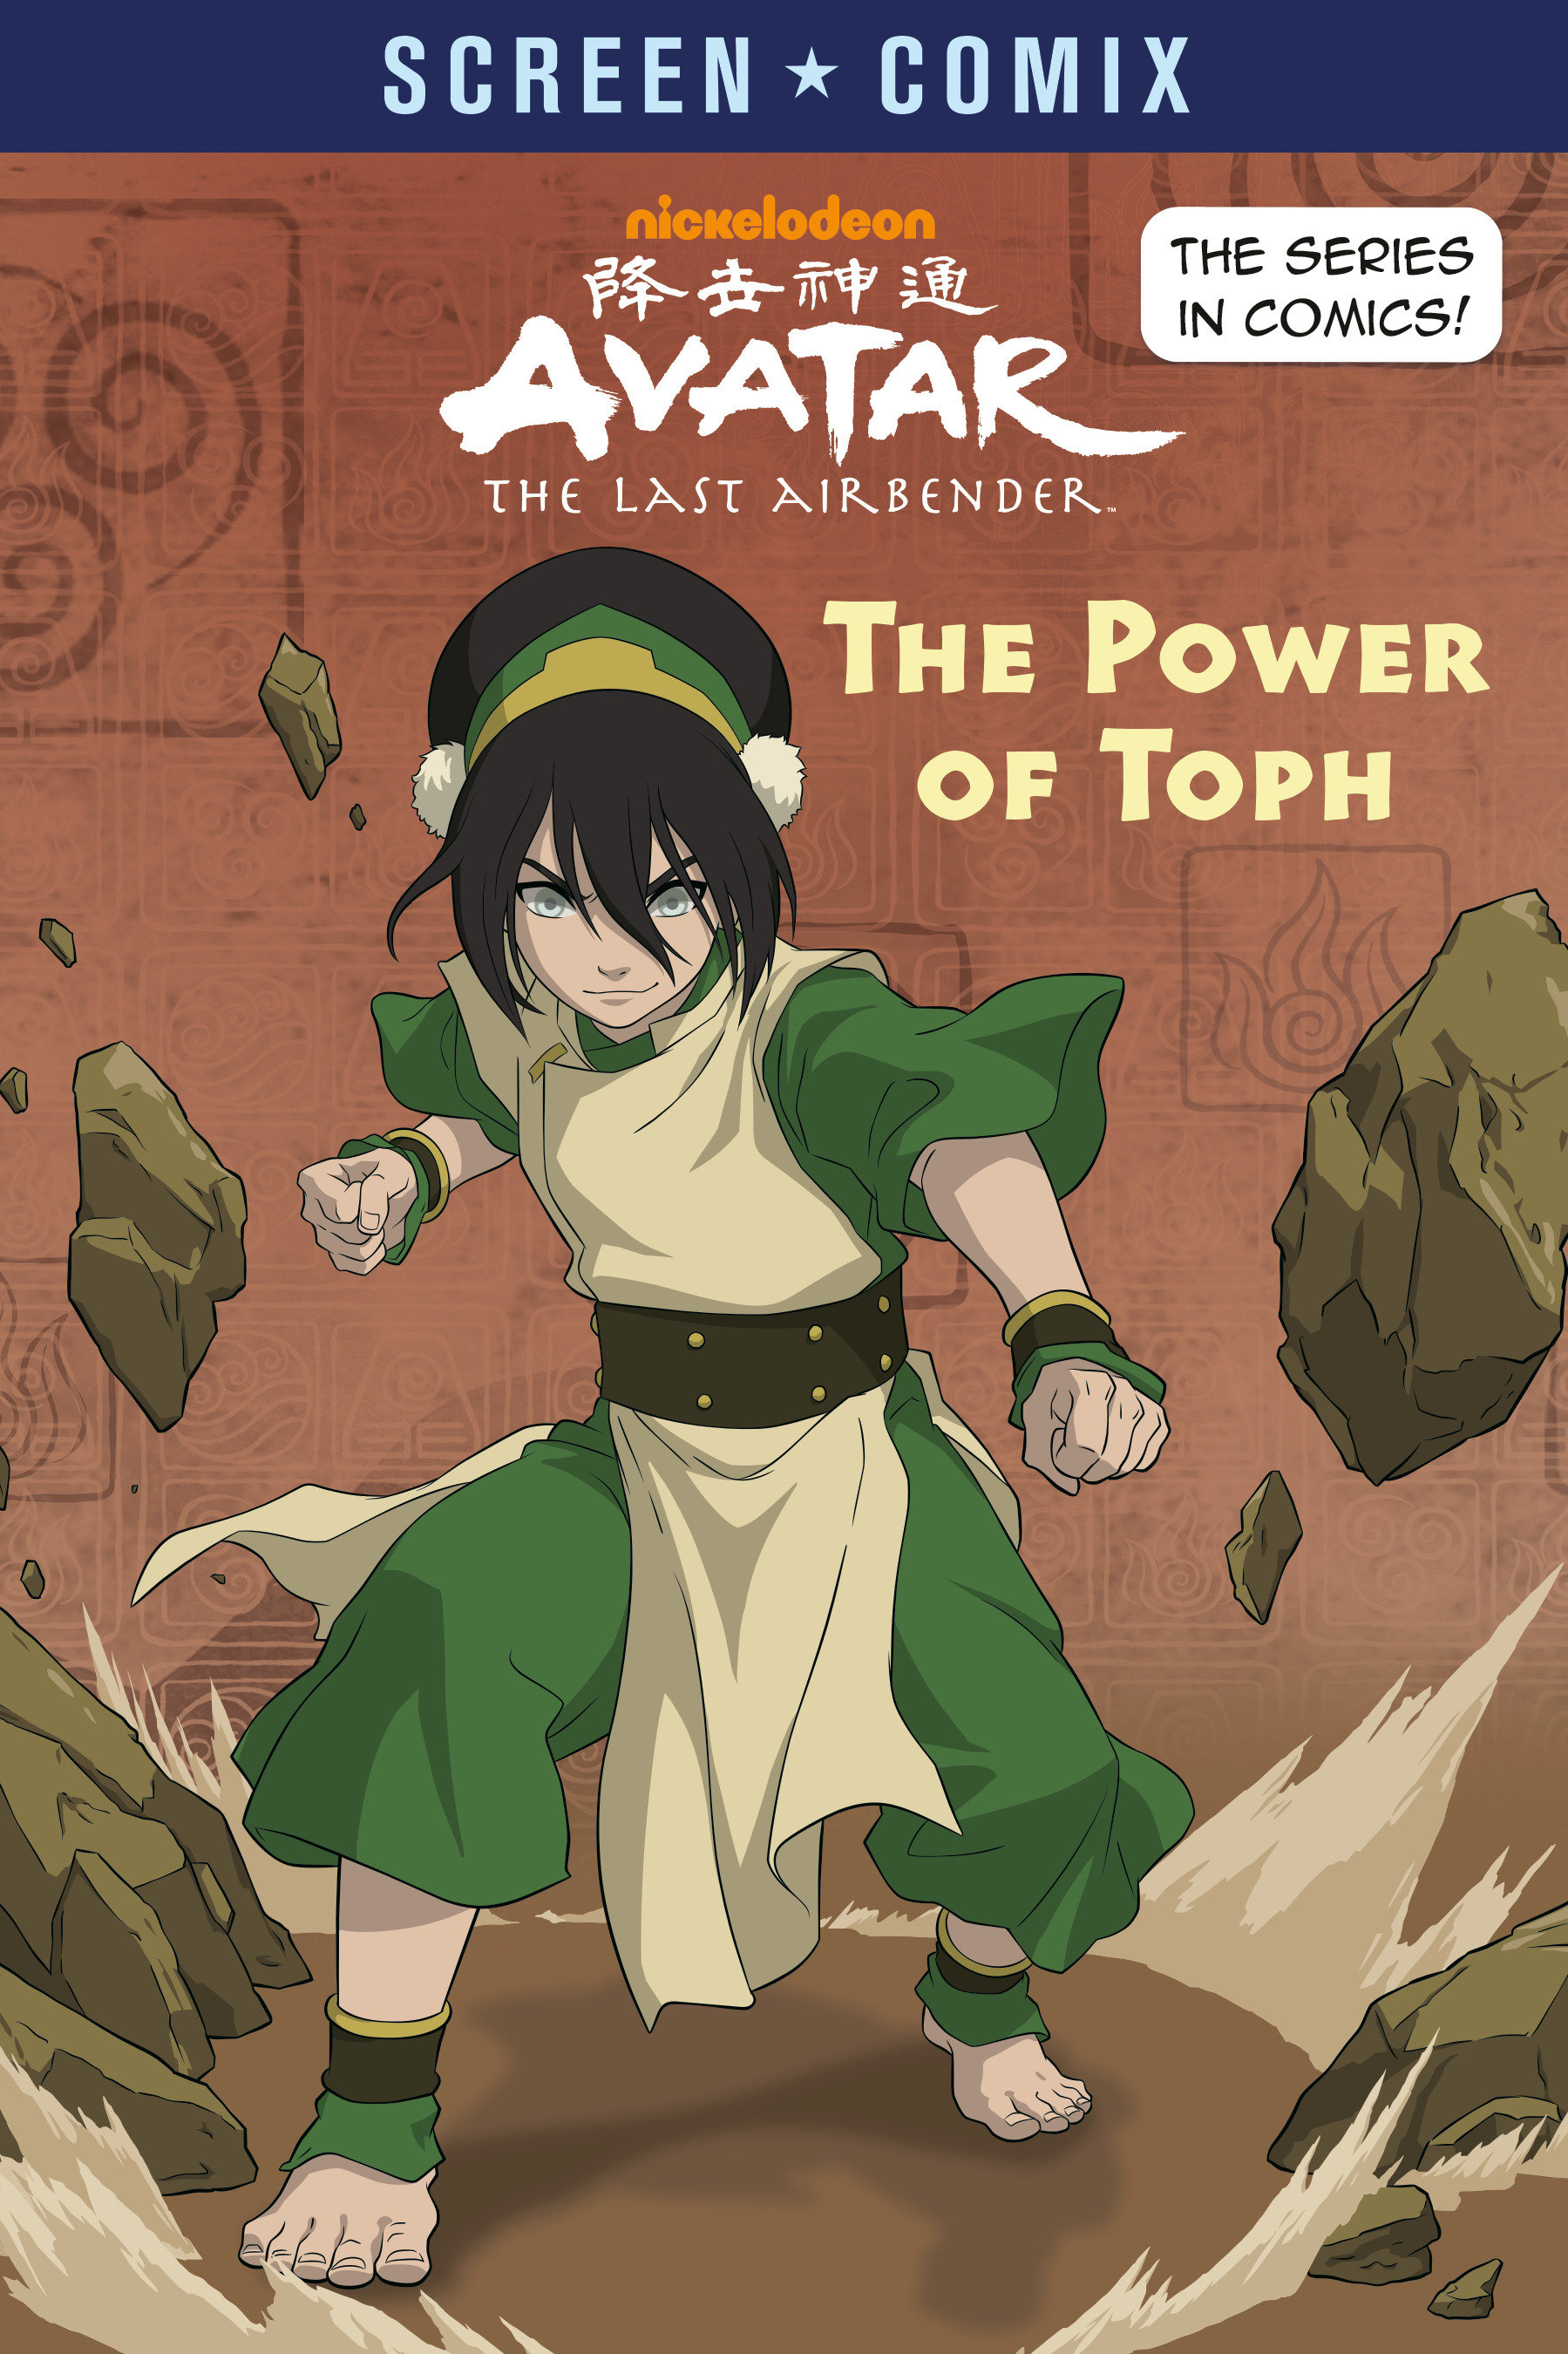 Buy Avatar Last Airbender Screen Comix Graphic Novel Power Of Toph